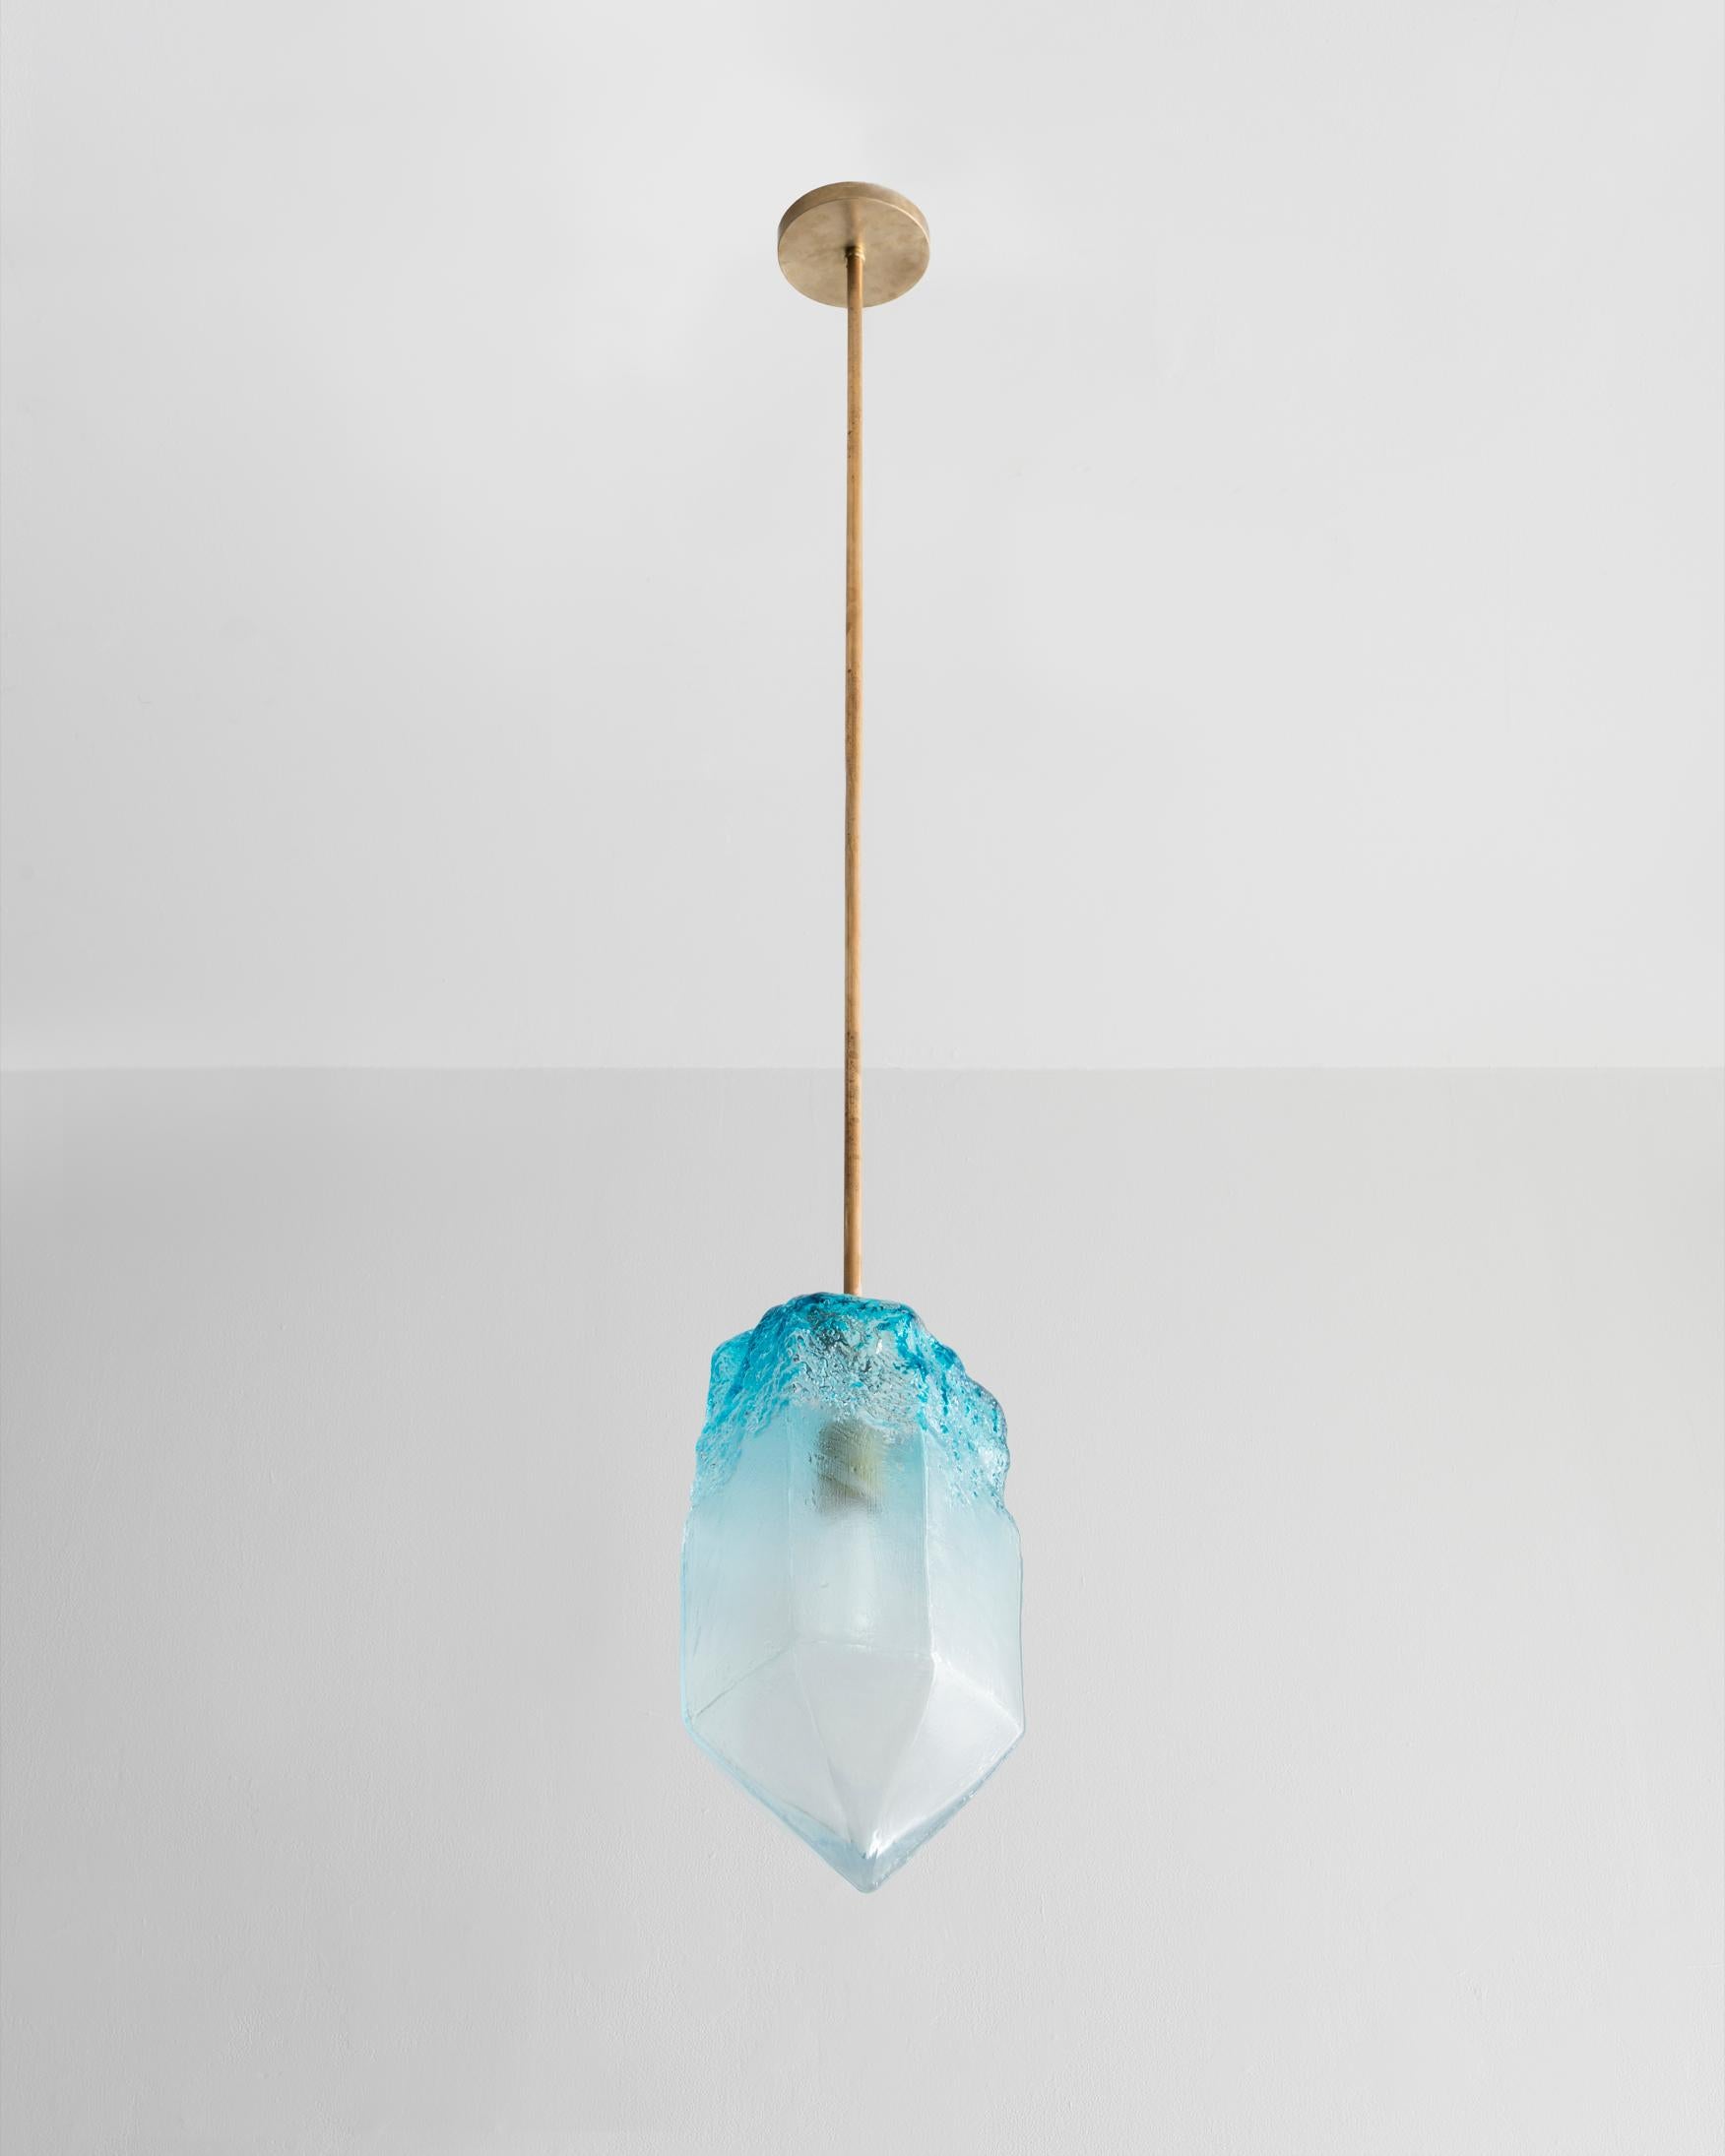 Sculptural Pendant Light in Turquoise and Nickel by Jeff Zimmerman, 2016 9